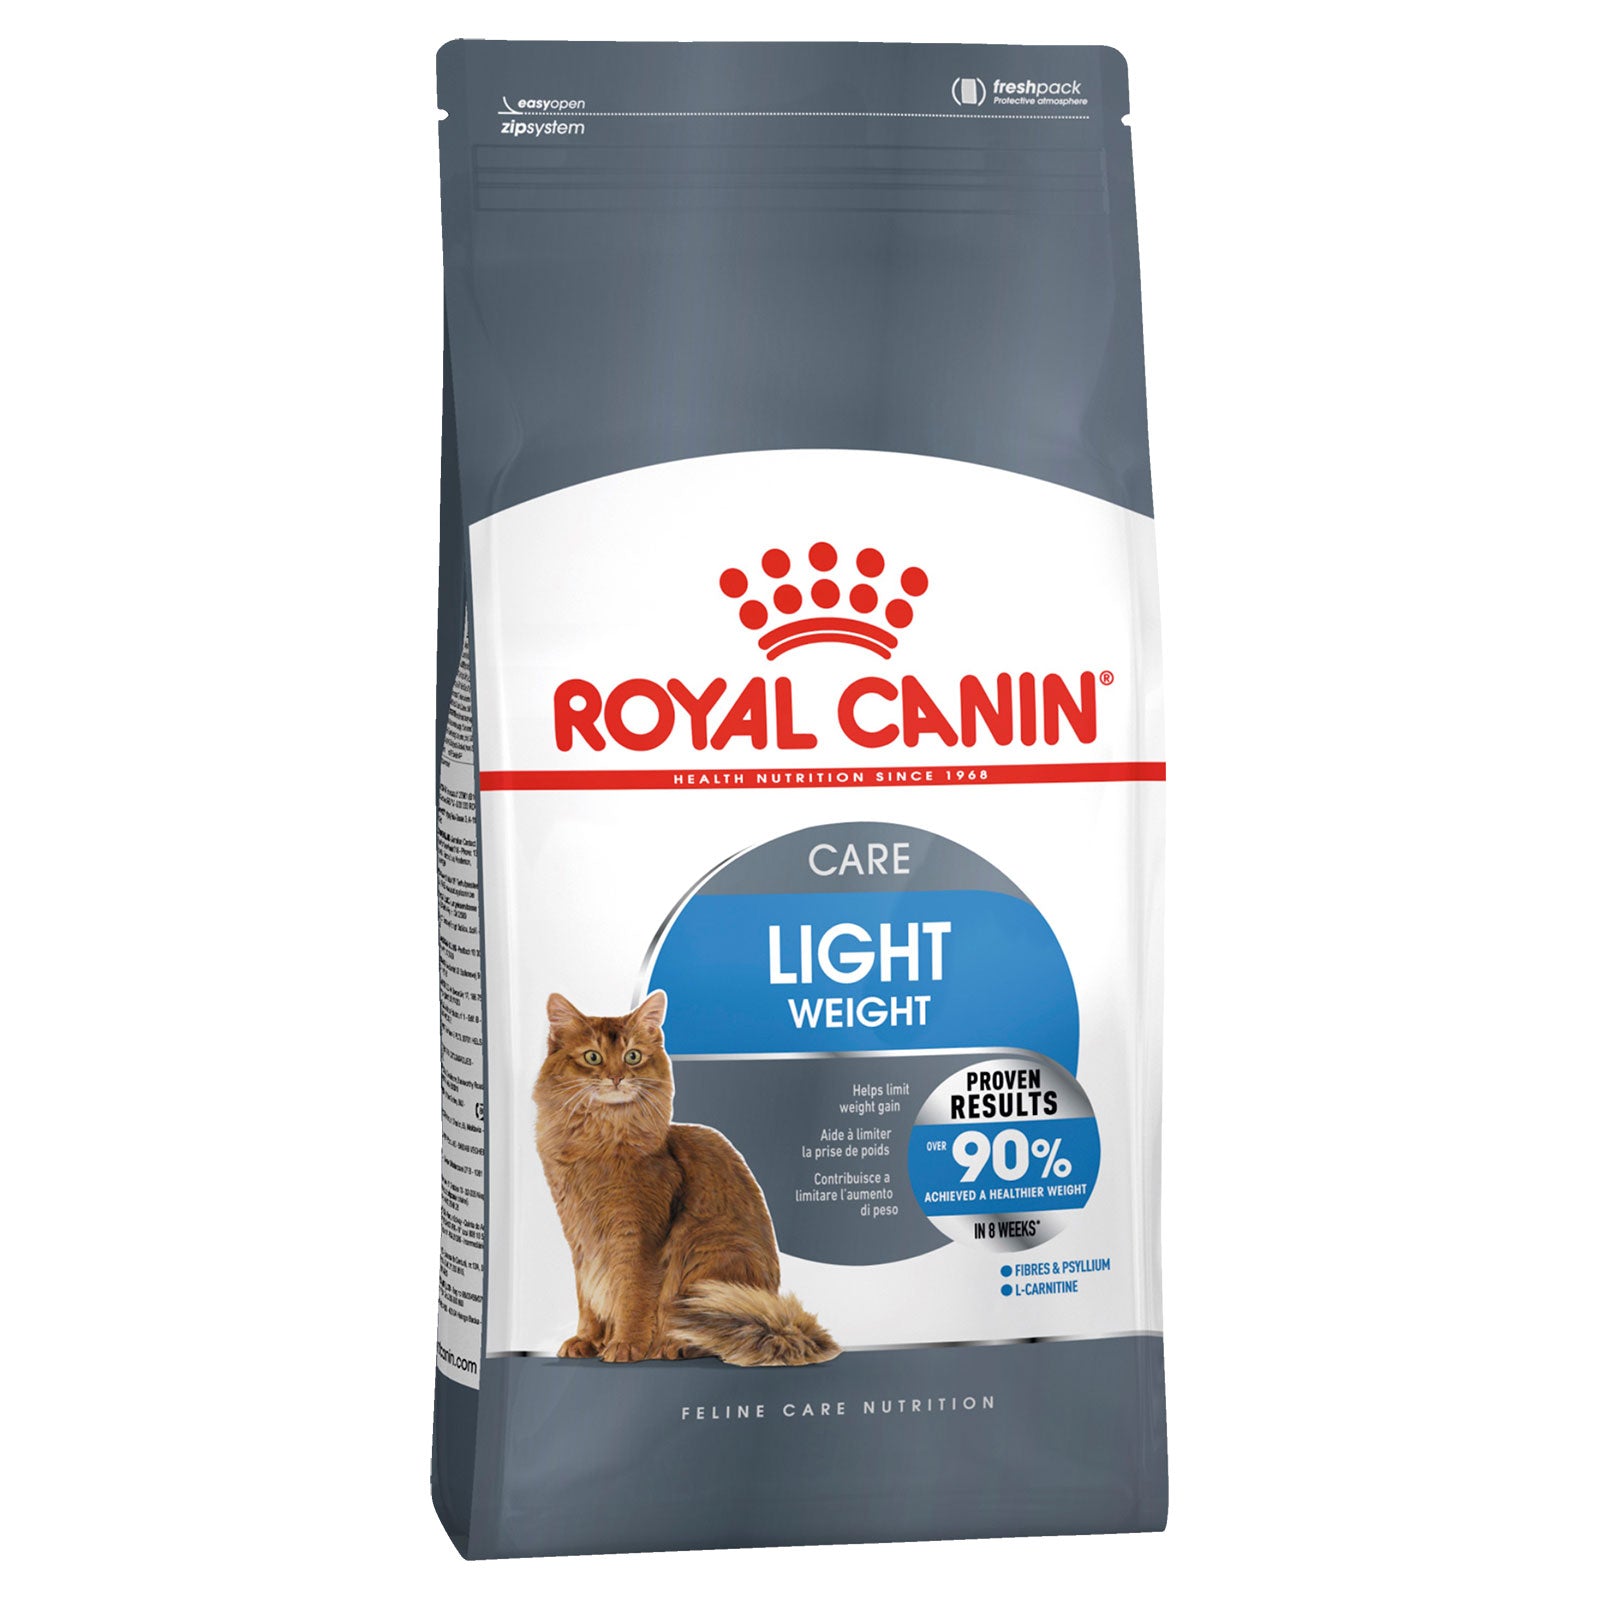 Royal Canin Cat Food Adult Light Weight Care